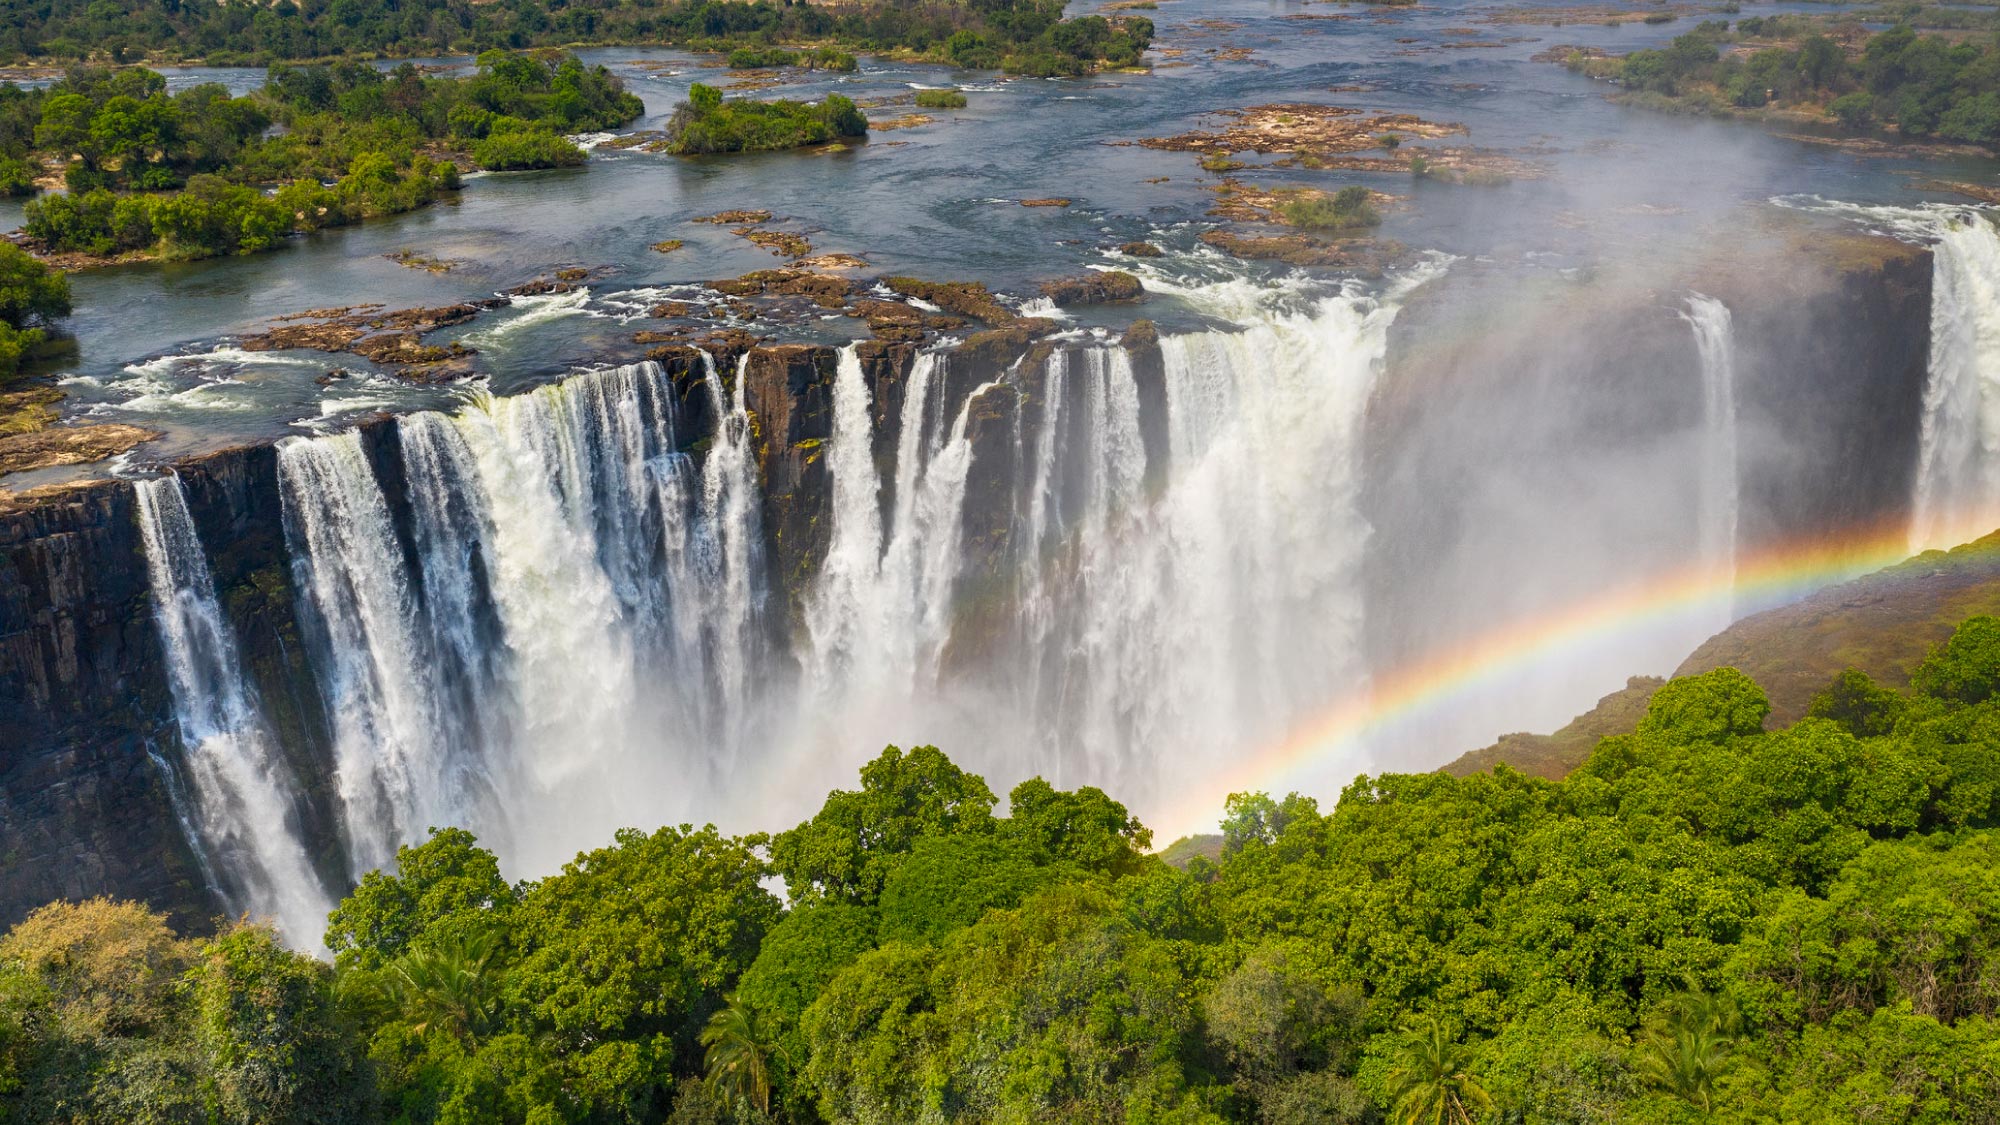 Experience the breathtaking Victoria Falls from above on a pilot's journey, flying over Zambia's stunning landscapes. Take a thrilling helicopter tour and discover the iconic Devil's Pool, where daring adventurers can swim at the edge of the majestic falls.